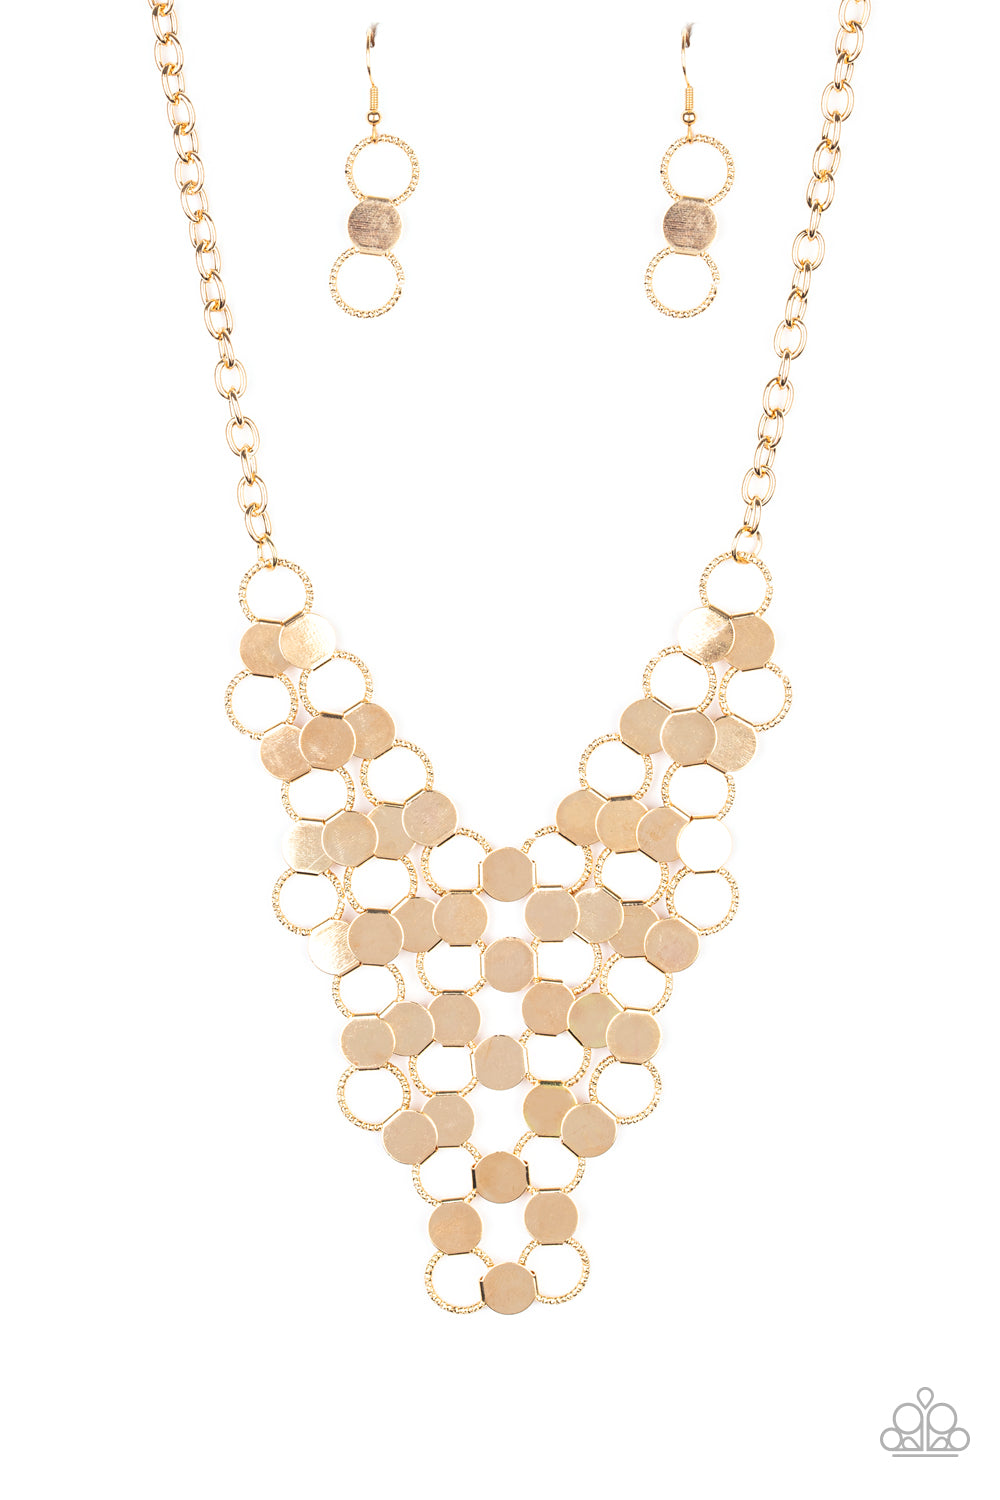 Paparazzi Net Result - Gold Necklace - A Finishing Touch 